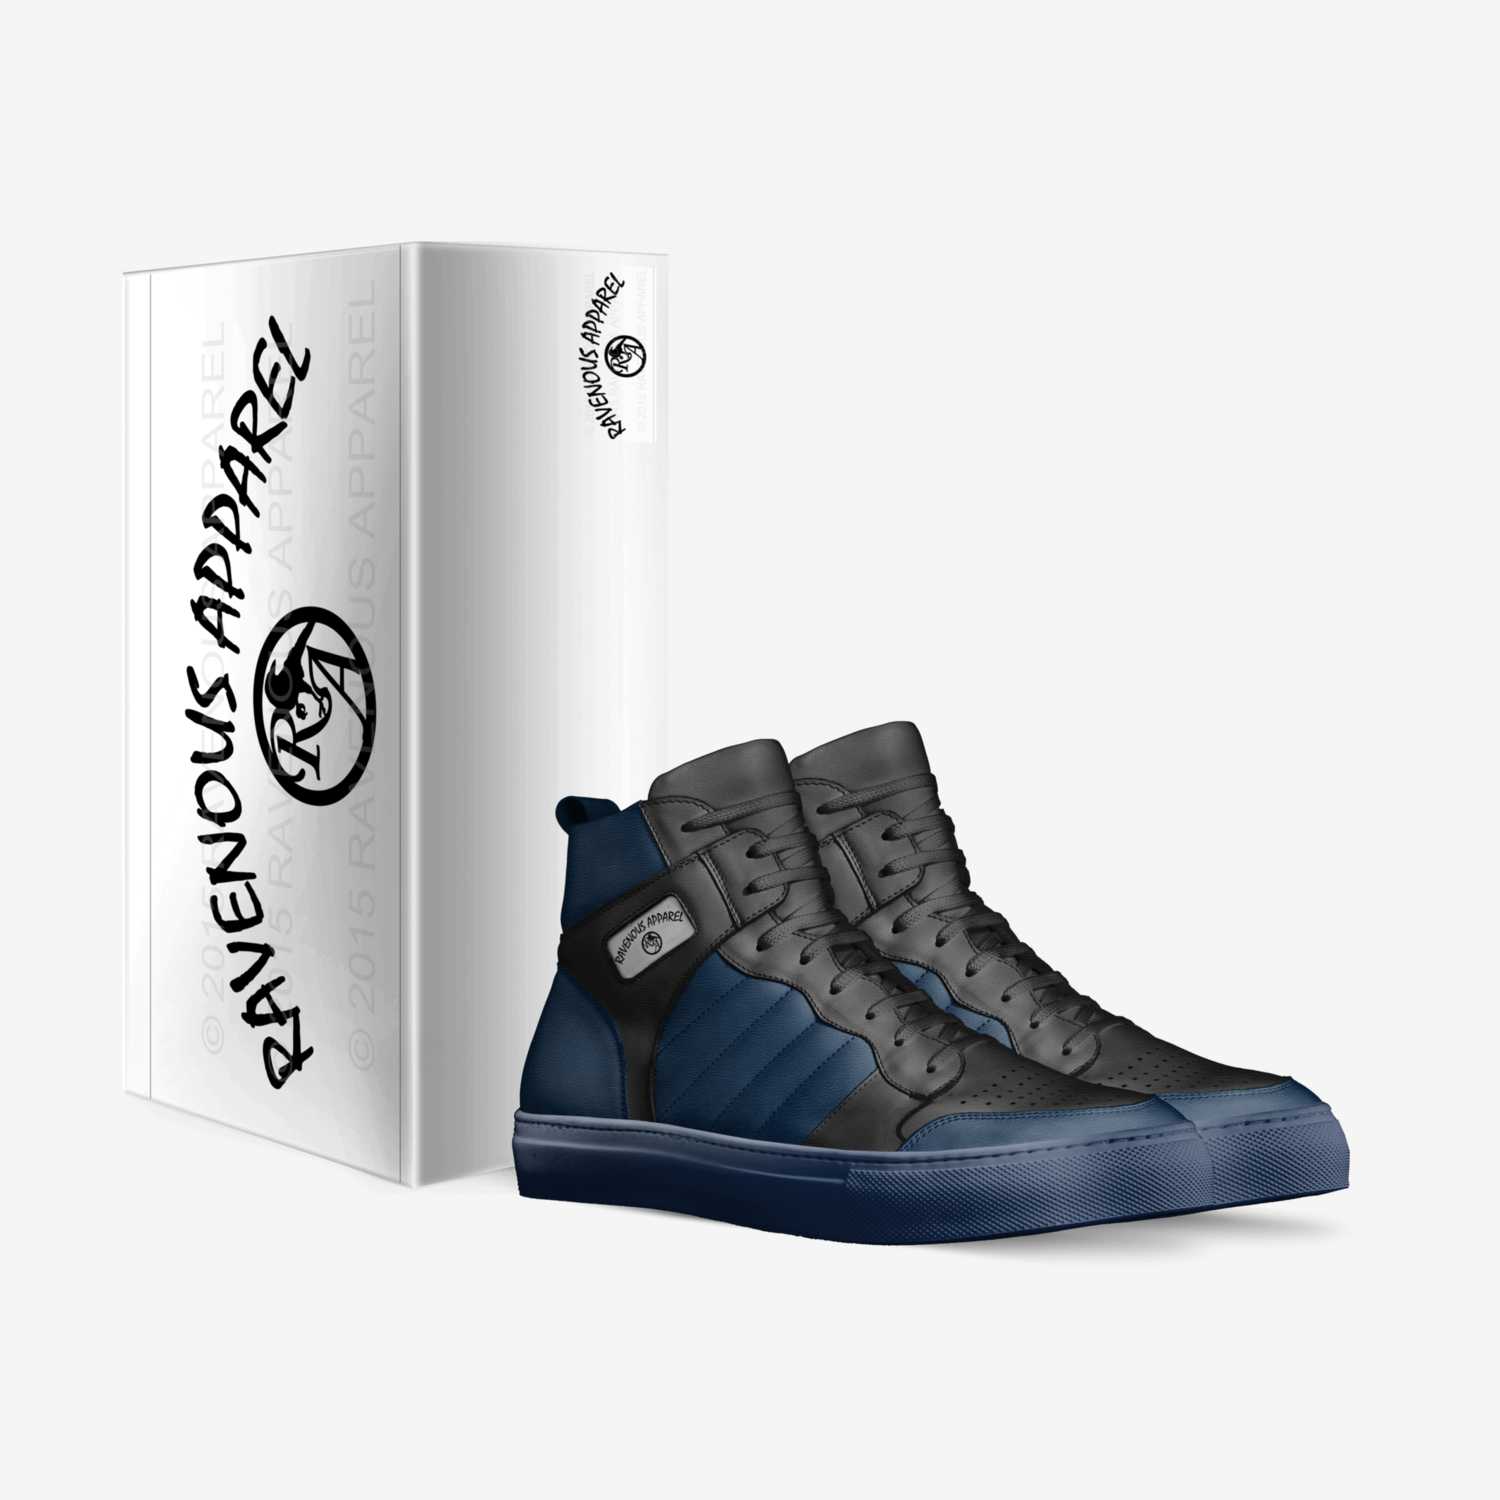 RA/BB custom made in Italy shoes by Thomas Rodriguez | Box view